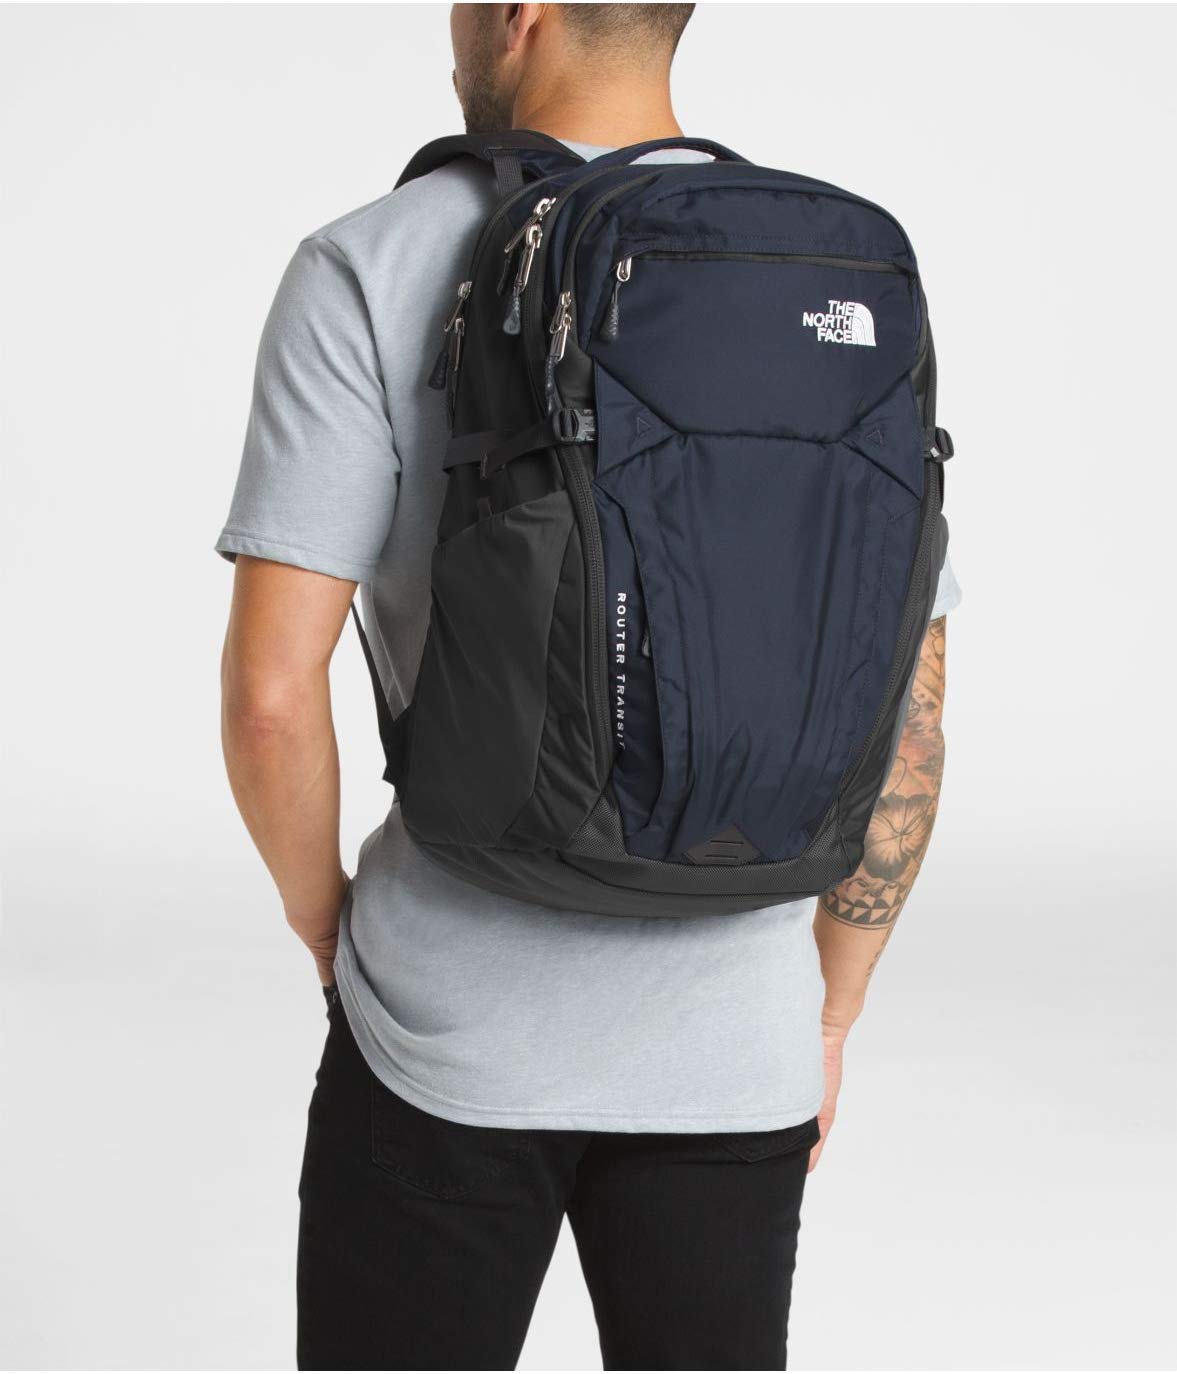 The North Face Router Transit 2018 Grey The North Face ktmart.vn 7